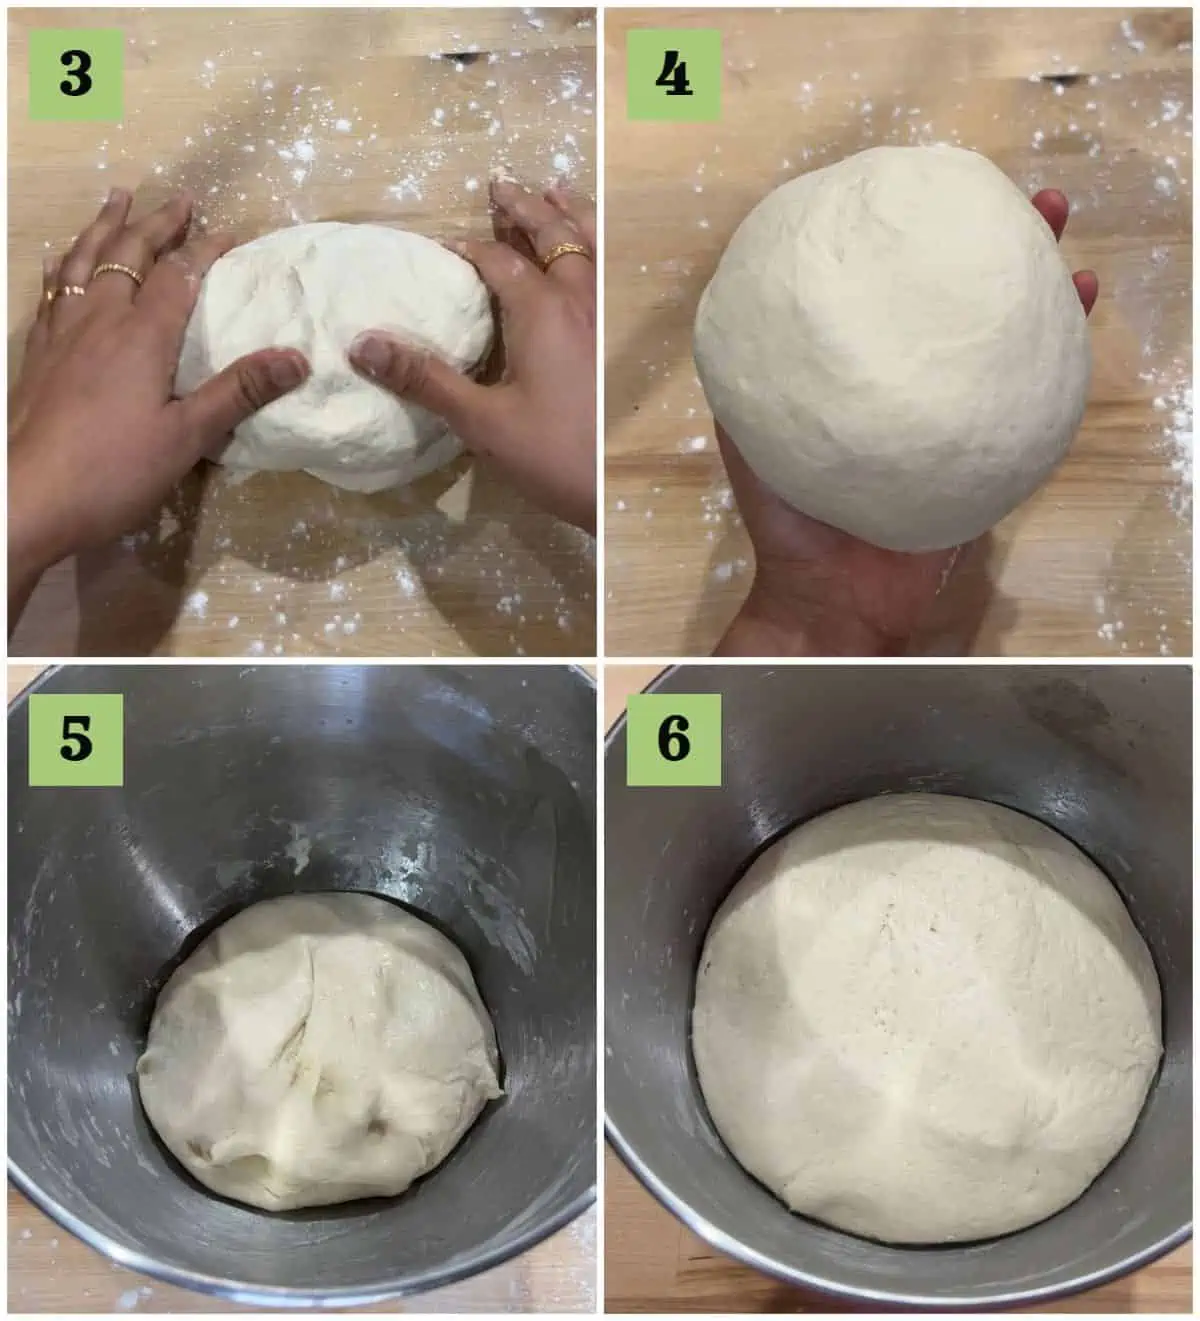 Process shot showing how to proof the dough for Bialys recipe. 